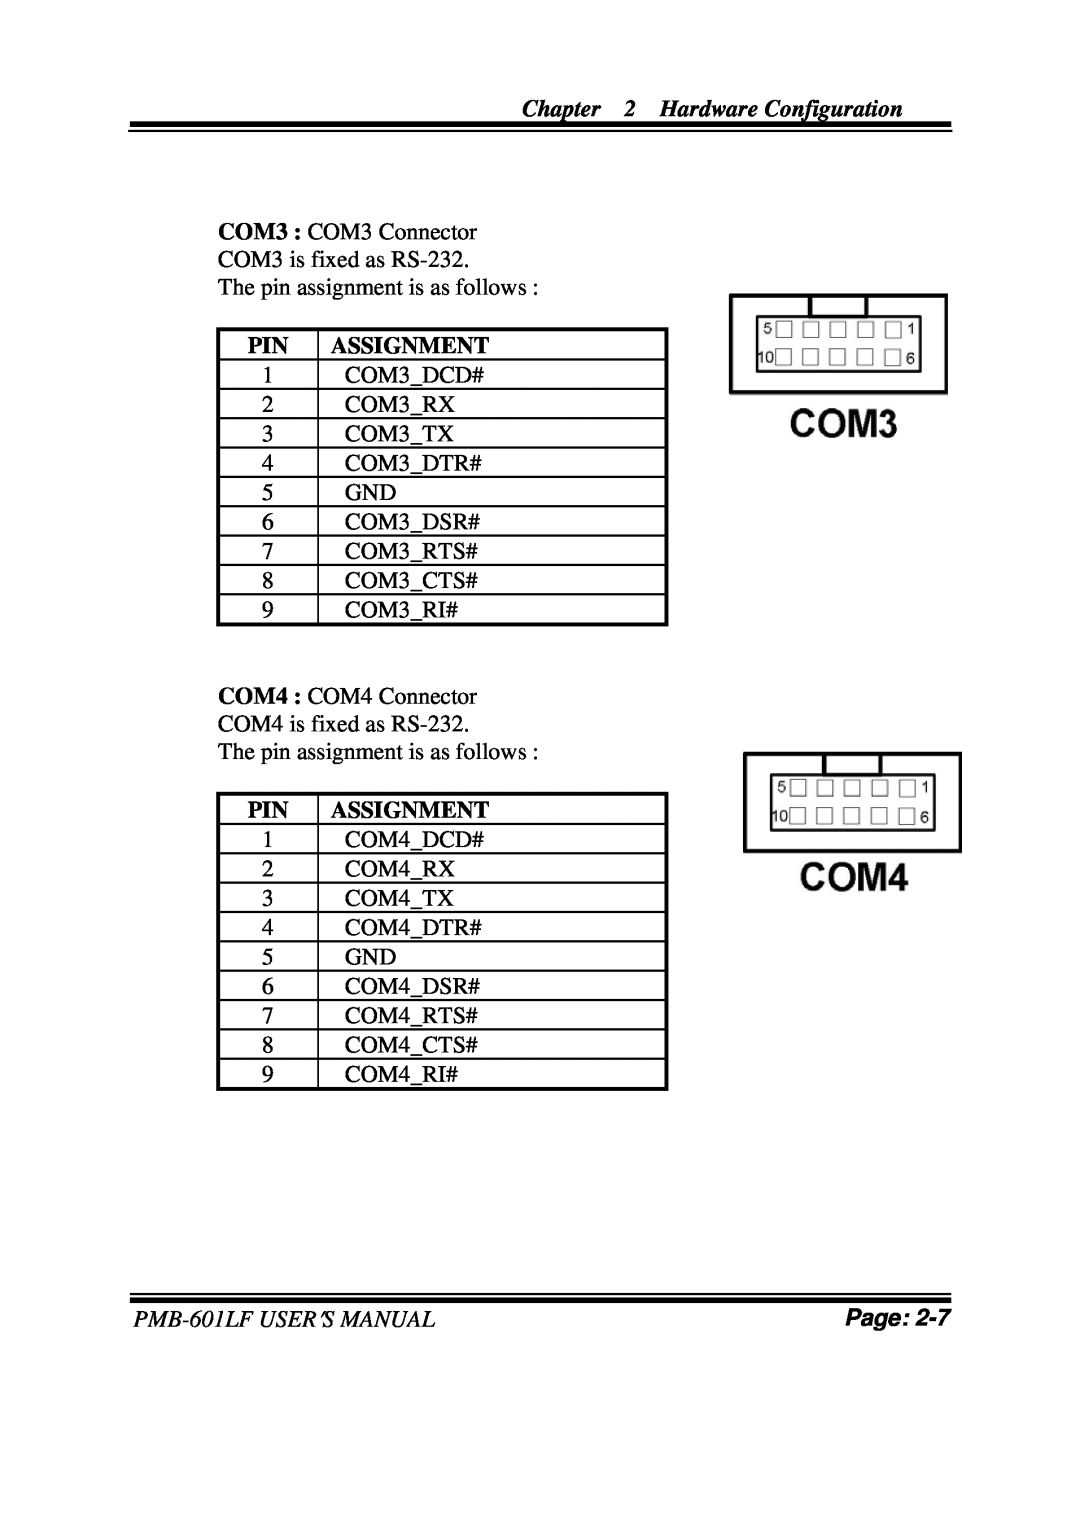 Intel user manual Hardware Configuration, Assignment, PMB-601LFUSER′S MANUAL, Page 